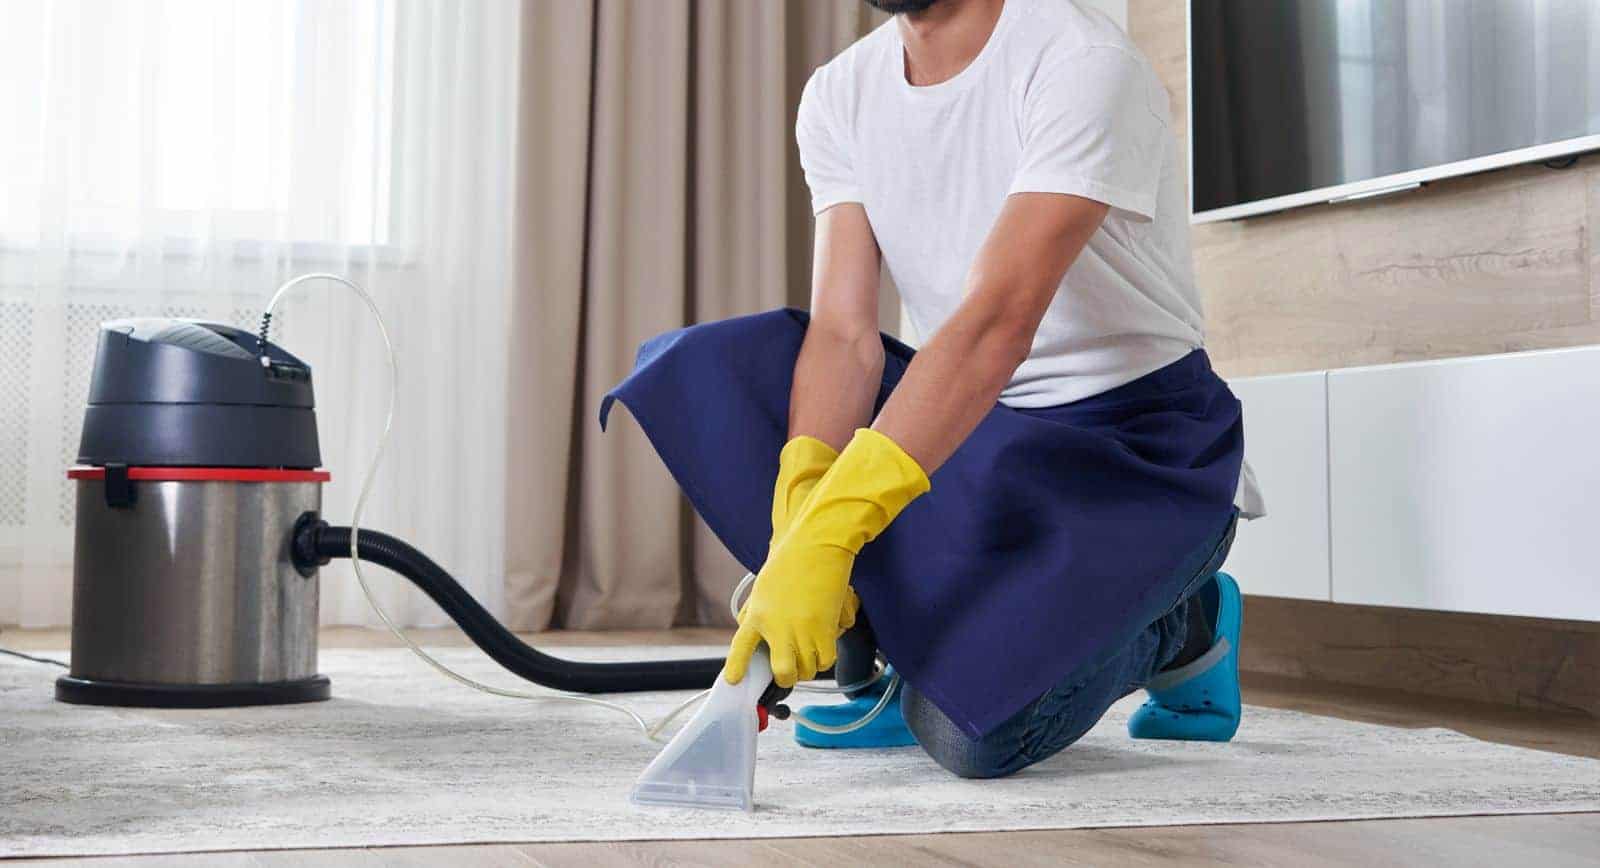 Professional carpet cleaner servicing a home in Sydney, Australia